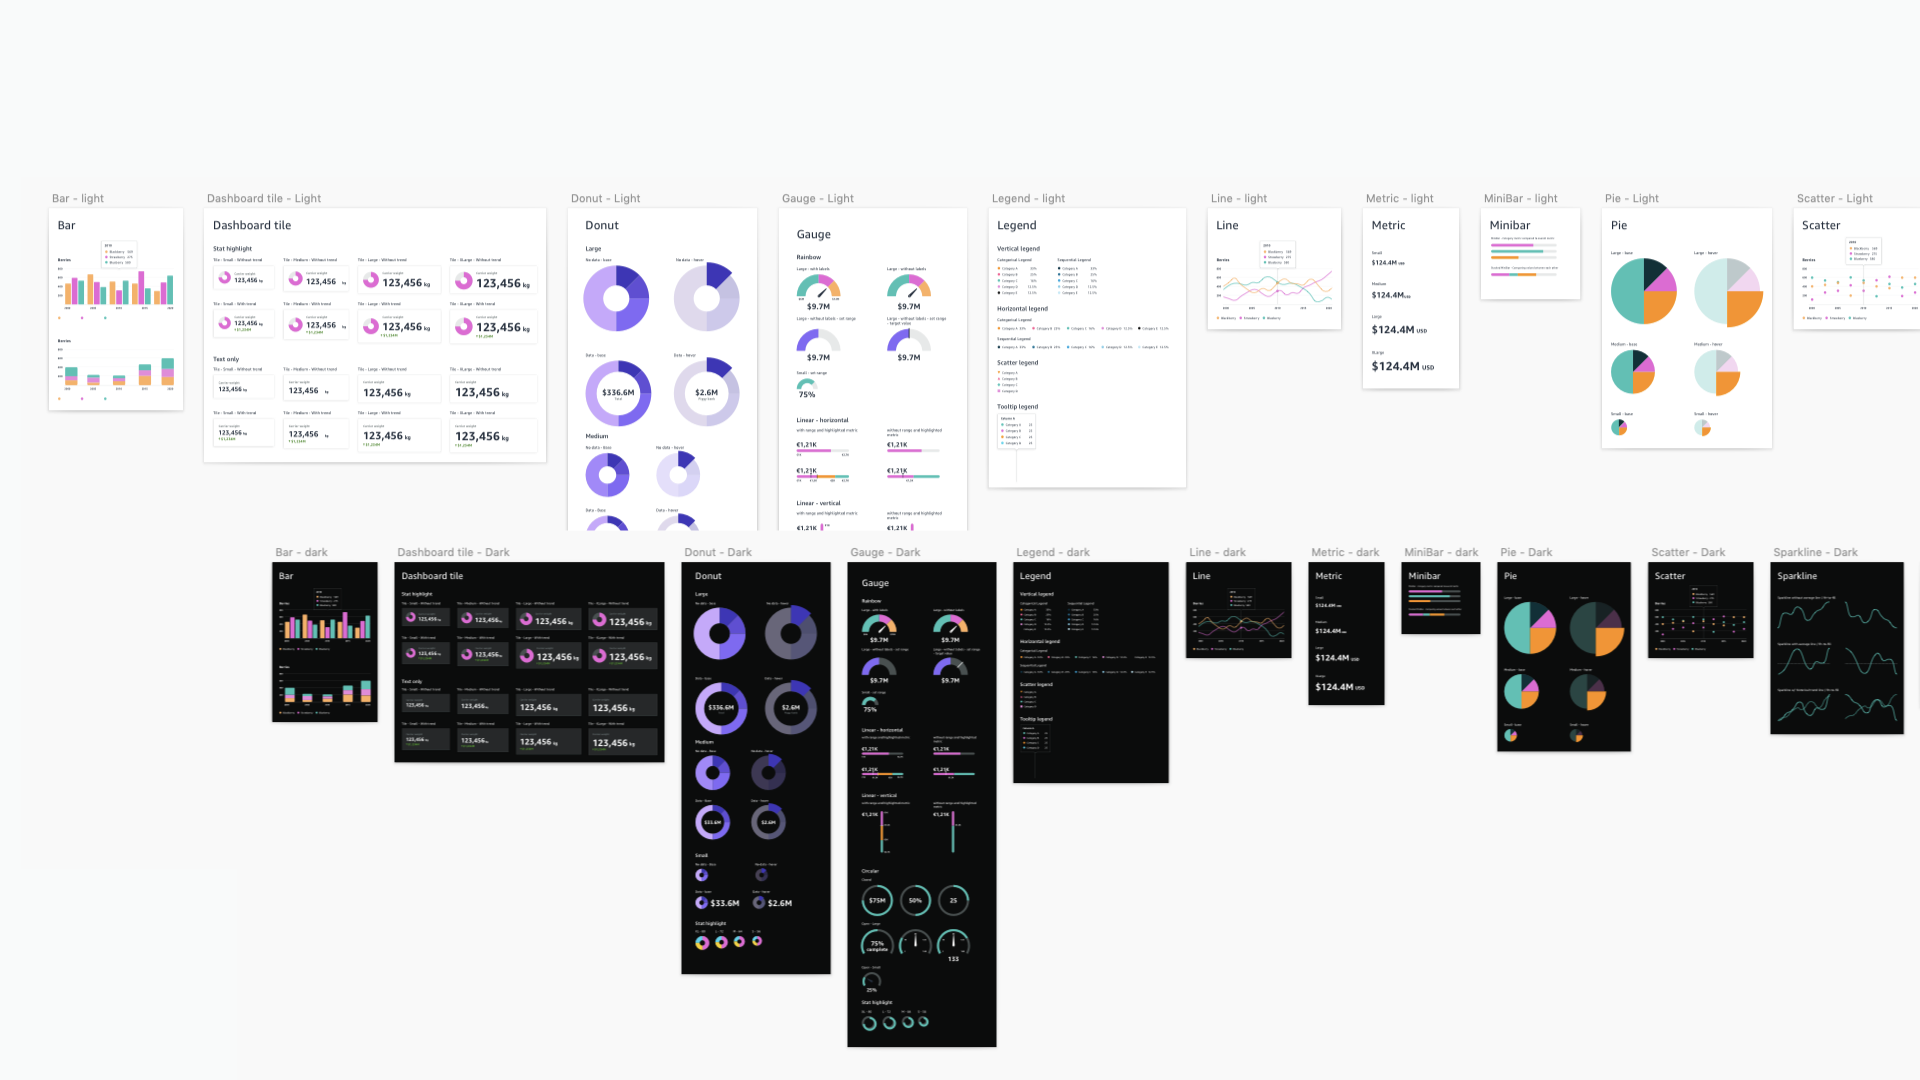 Image of the entire sketch library for data visualization.